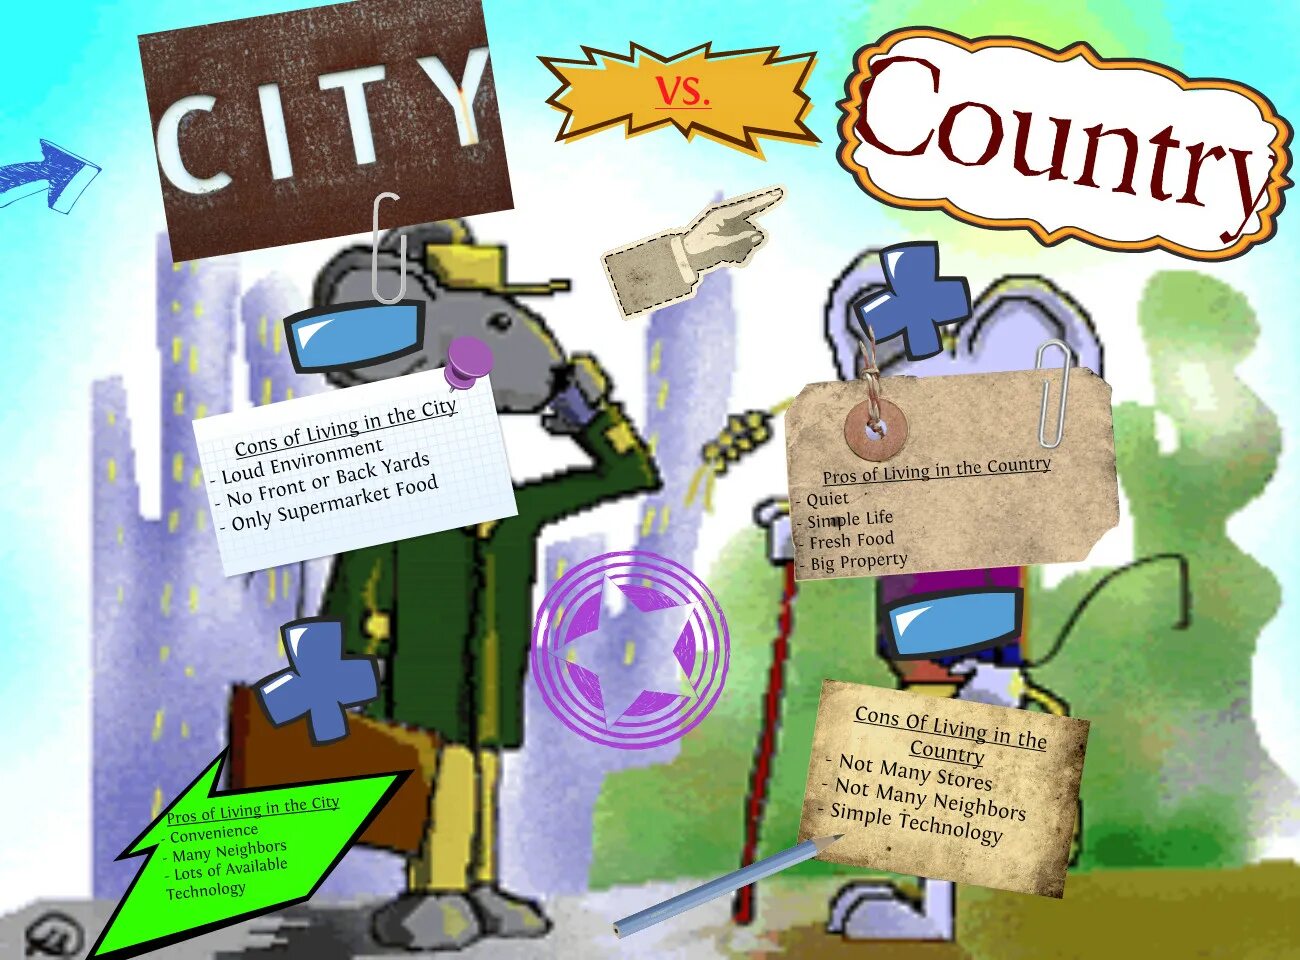 Living in city or countryside. City Life coutrylife. City Life and Country Life. City Life versus Country Life. City Life vs Country Life.